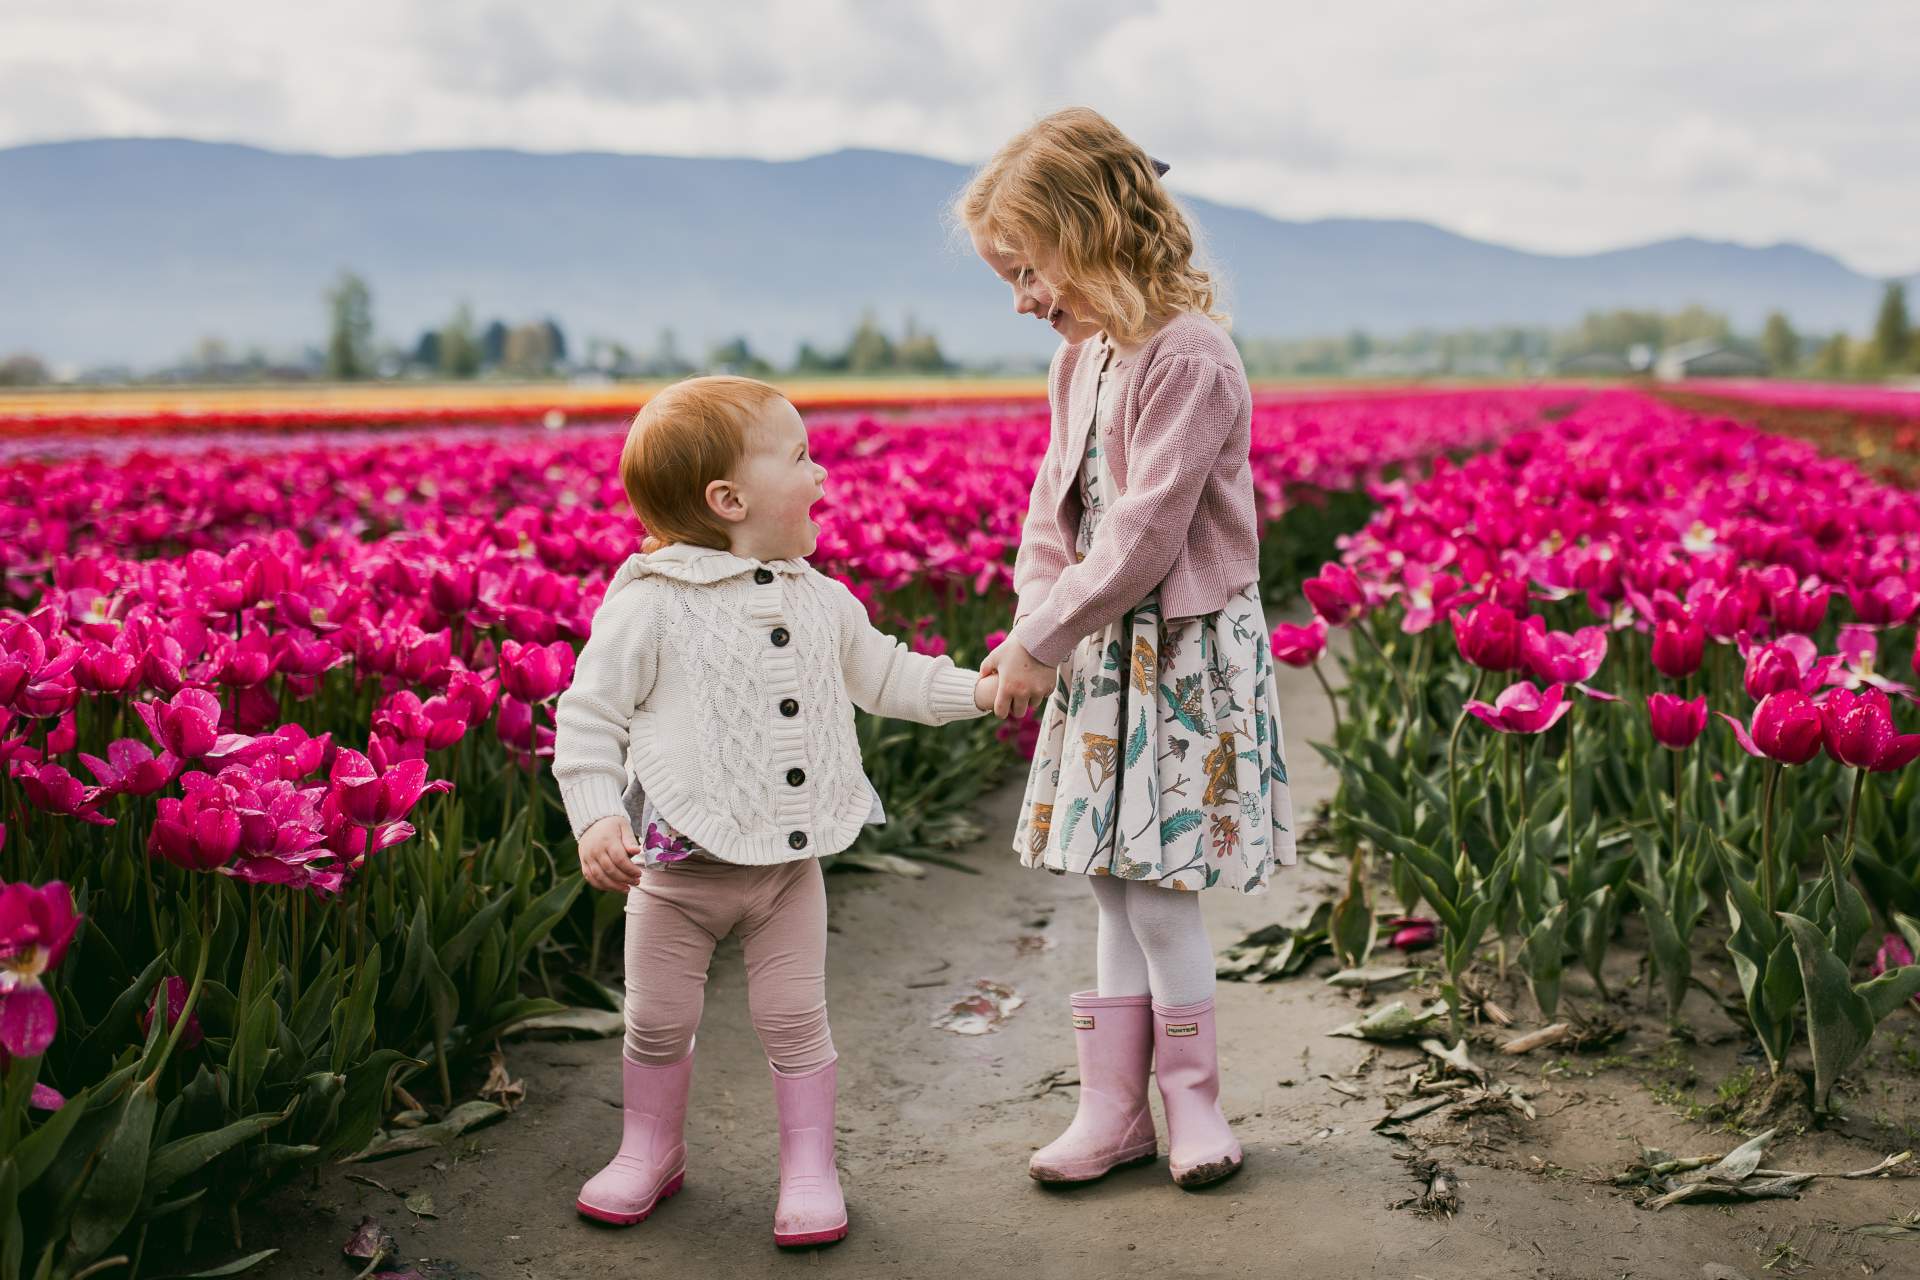 Call Out for Harrison Tulip Festival Photographers